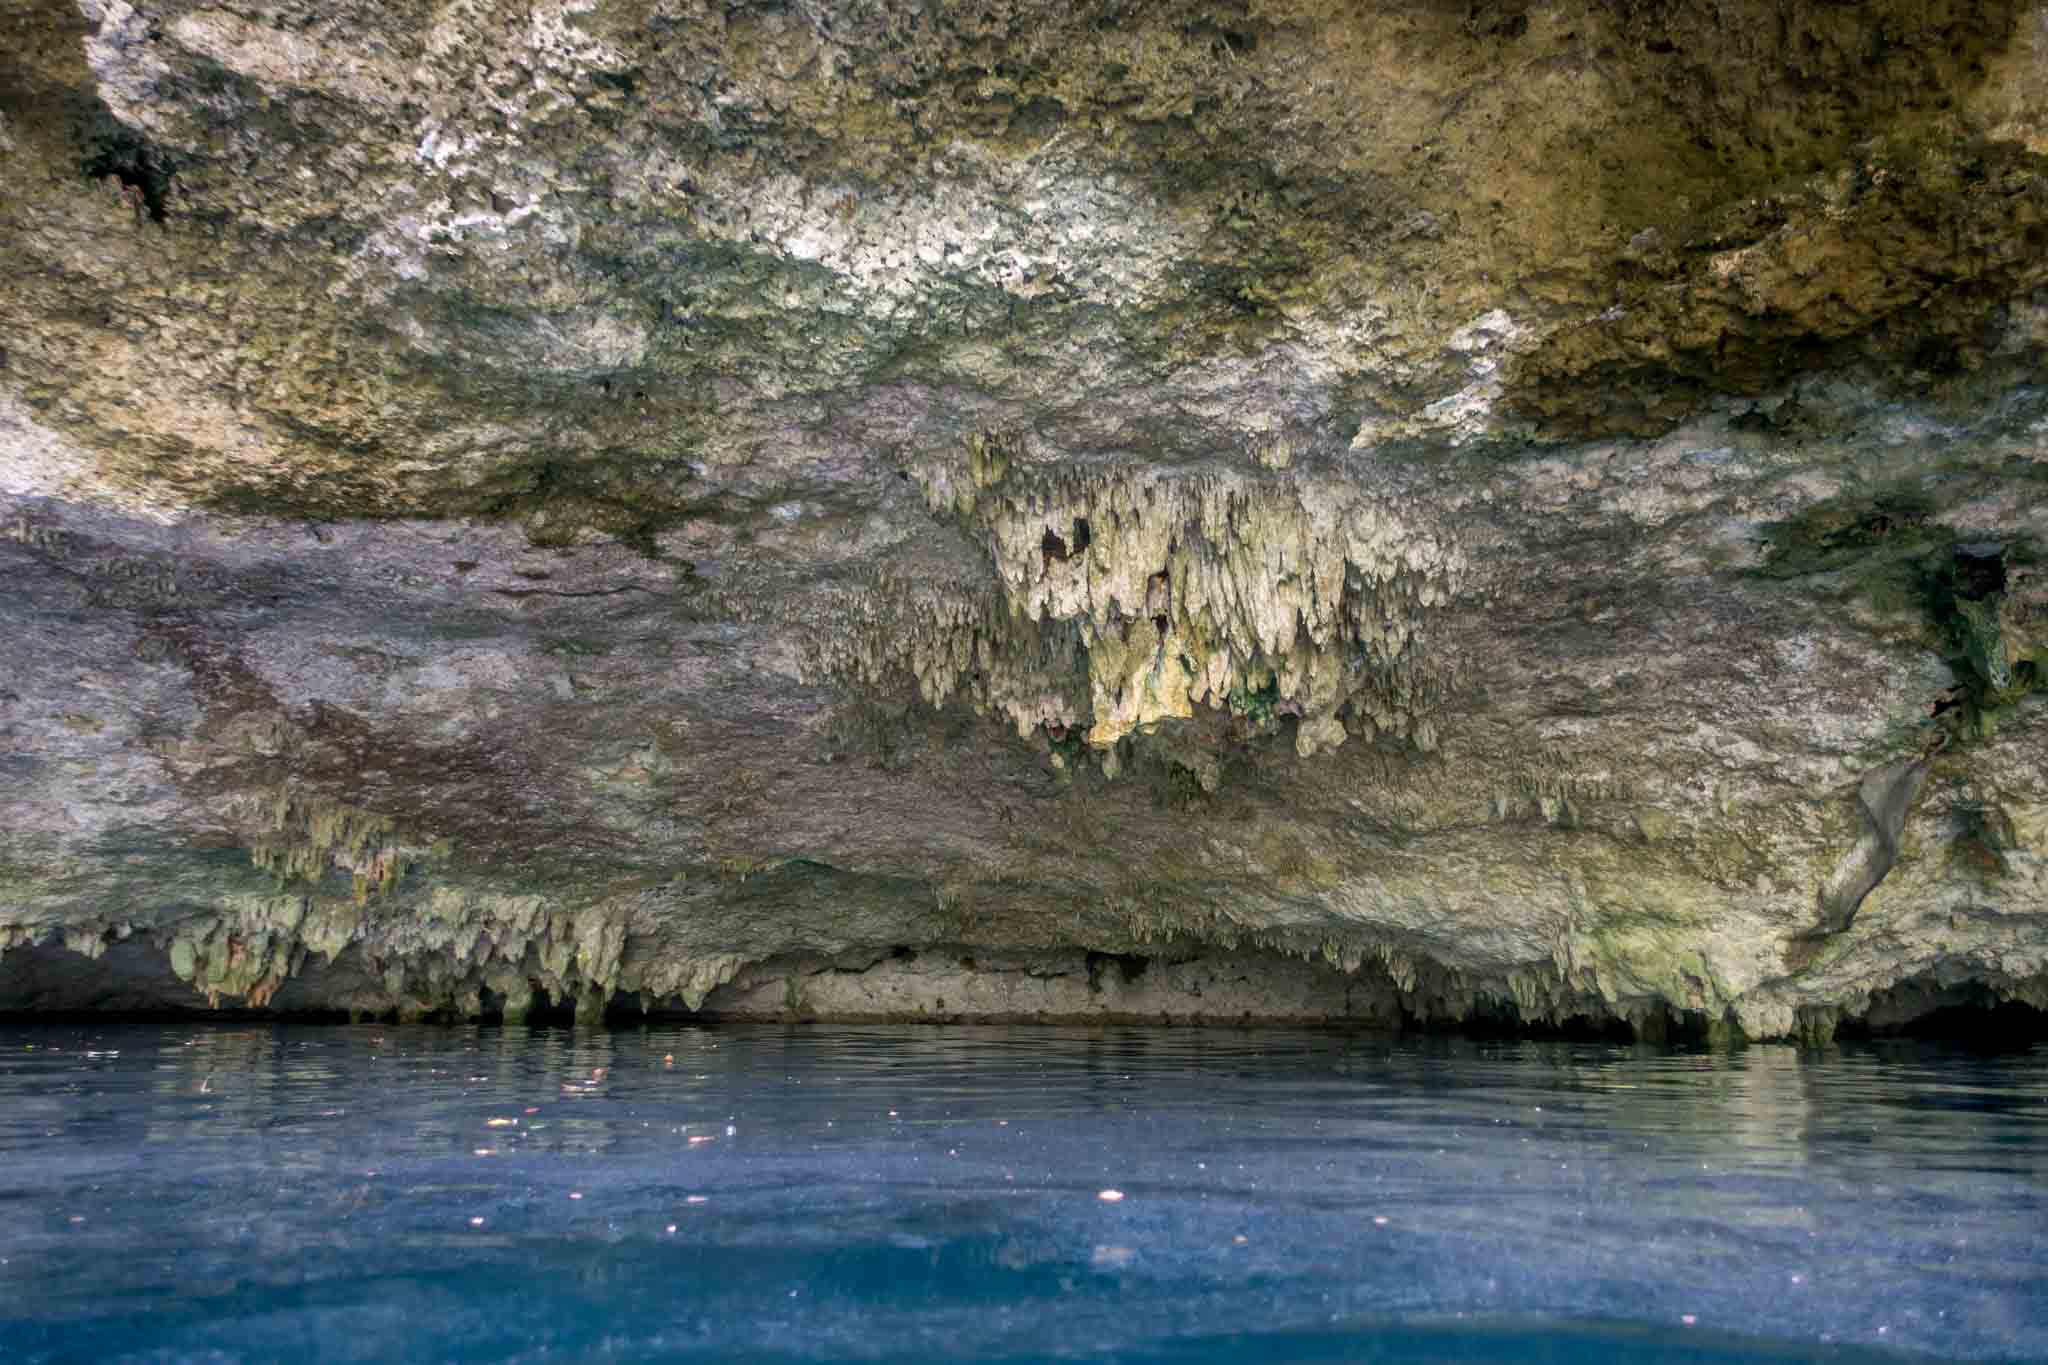 Stalactites above the water of the semi-open cenote